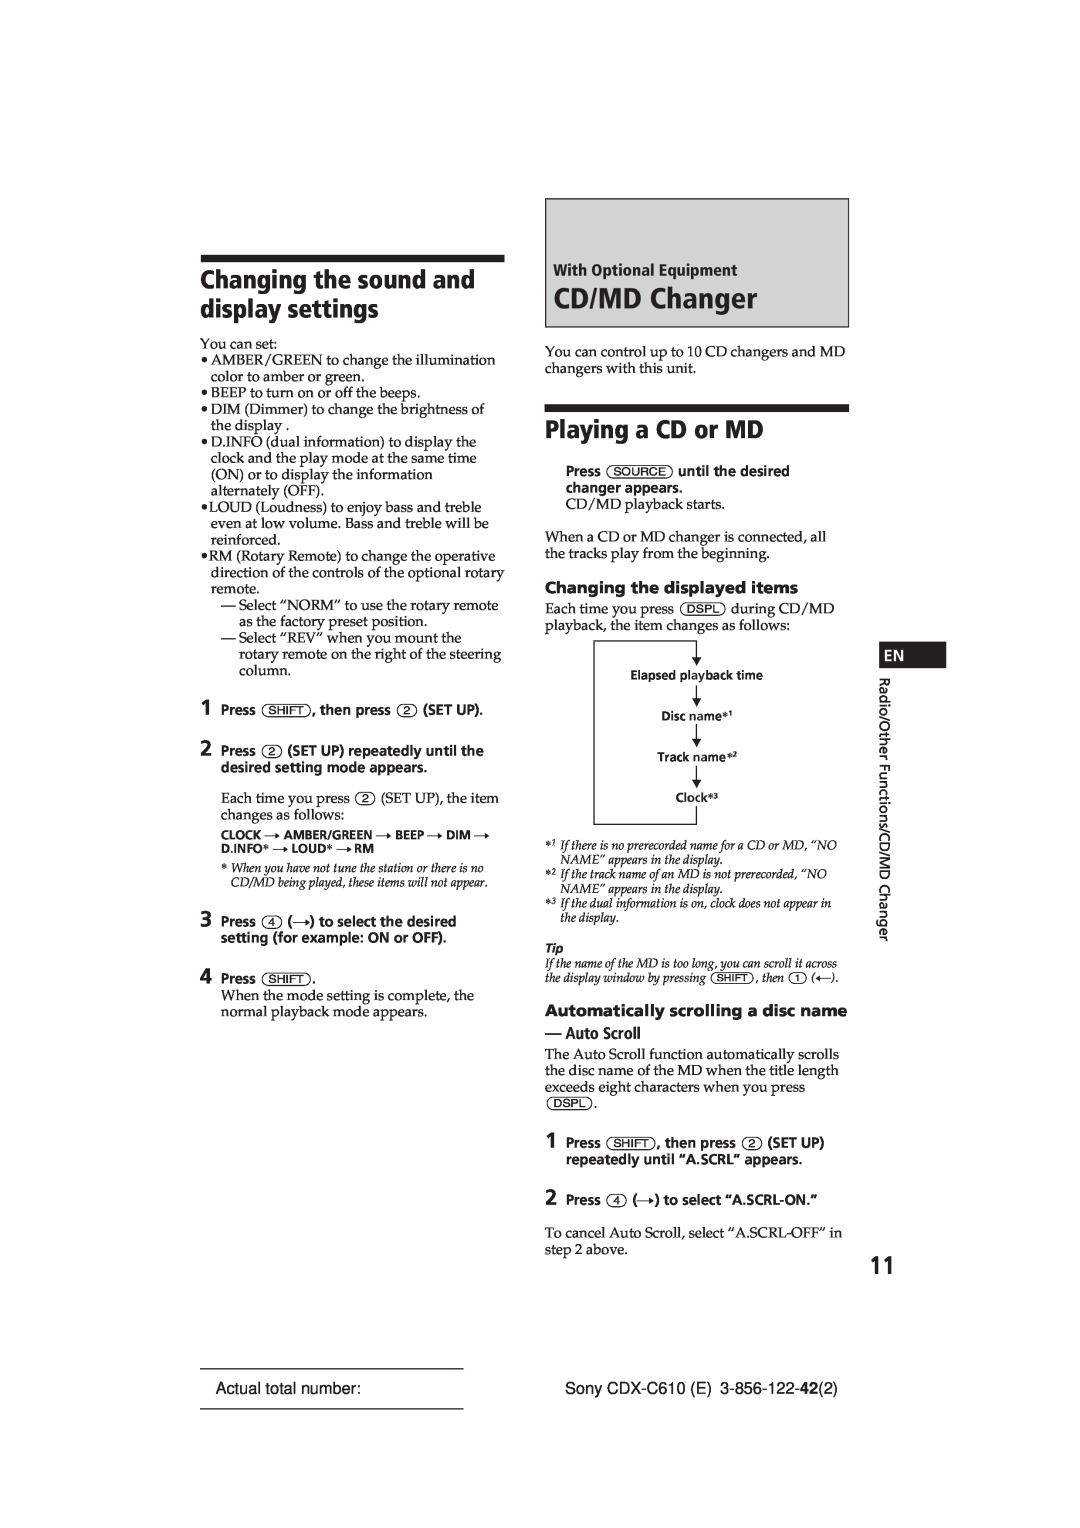 Sony CDX-C610 manual CD/MD Changer, Changing the sound and display settings, Playing a CD or MD, With Optional Equipment 